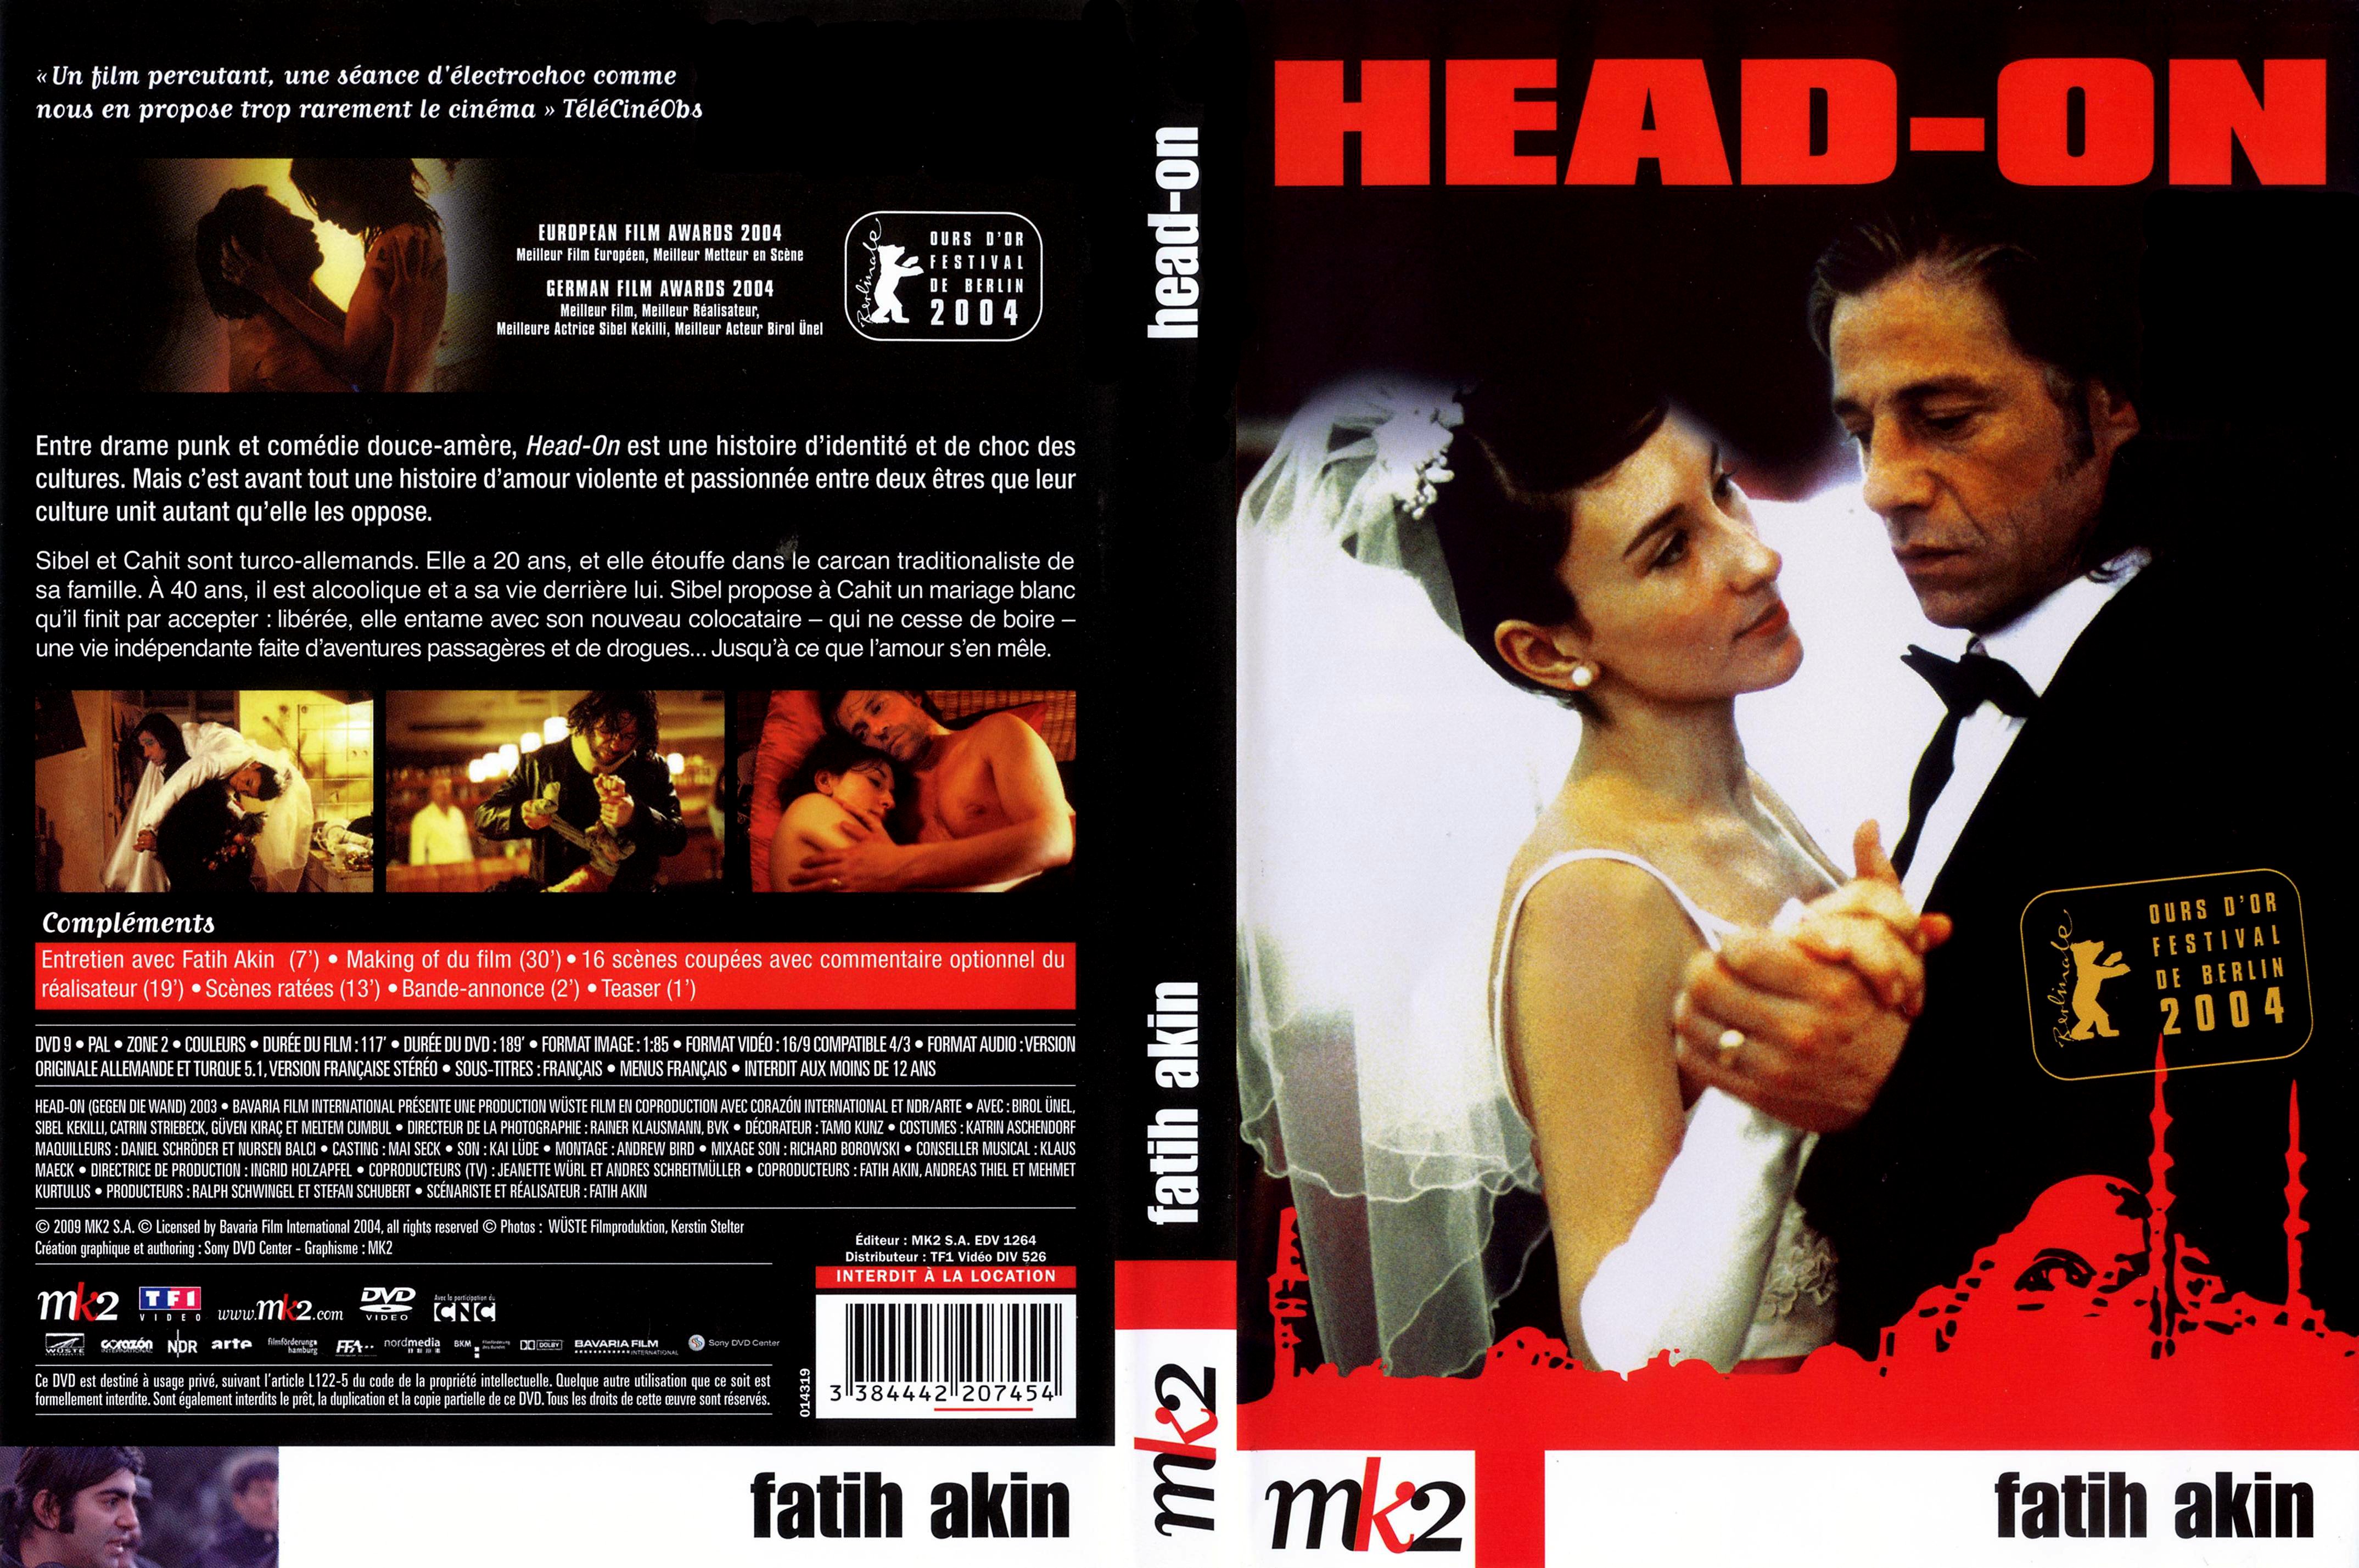 Jaquette DVD Head-on